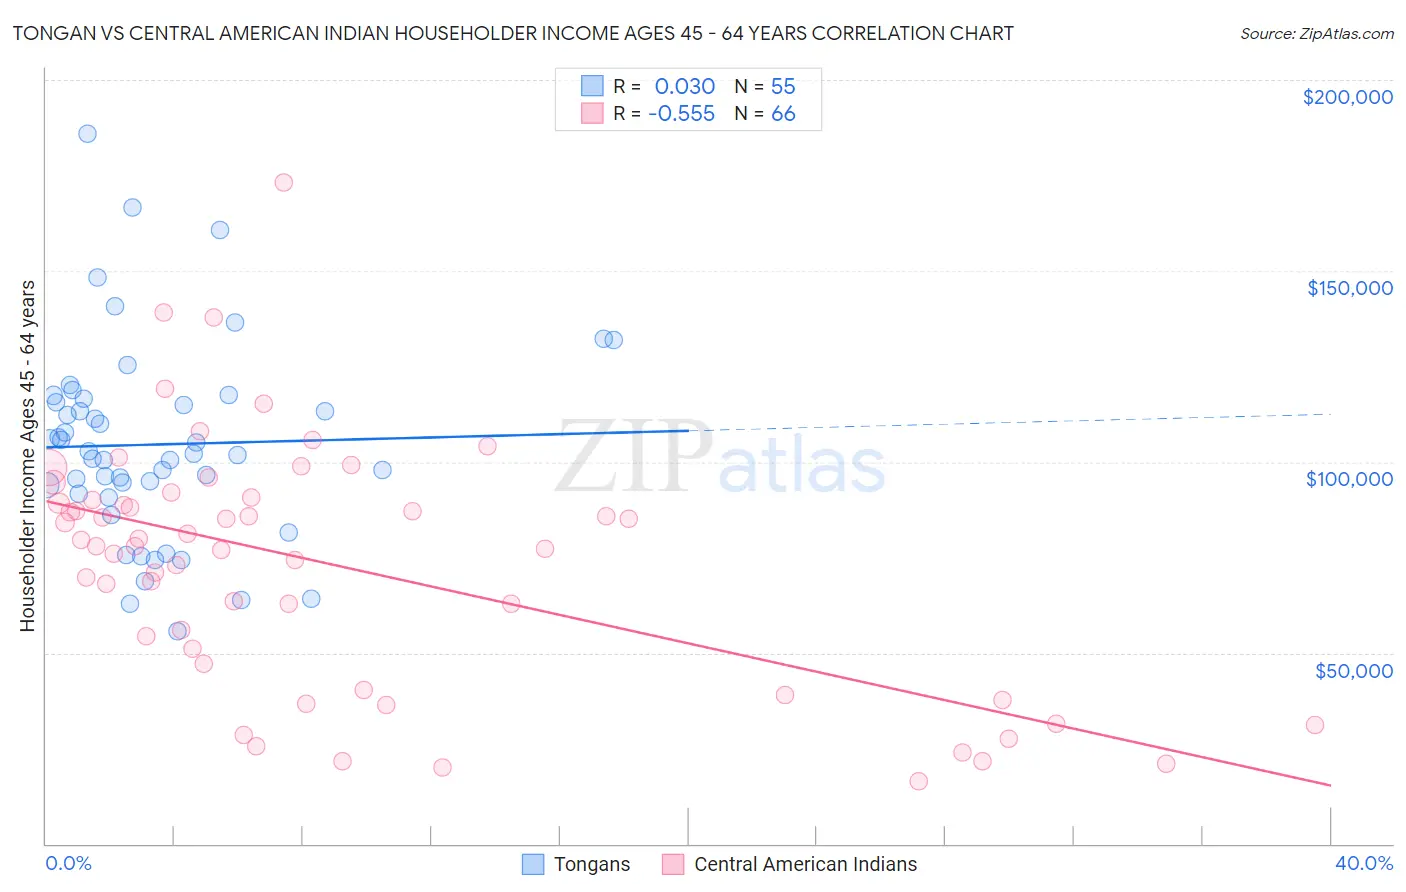 Tongan vs Central American Indian Householder Income Ages 45 - 64 years